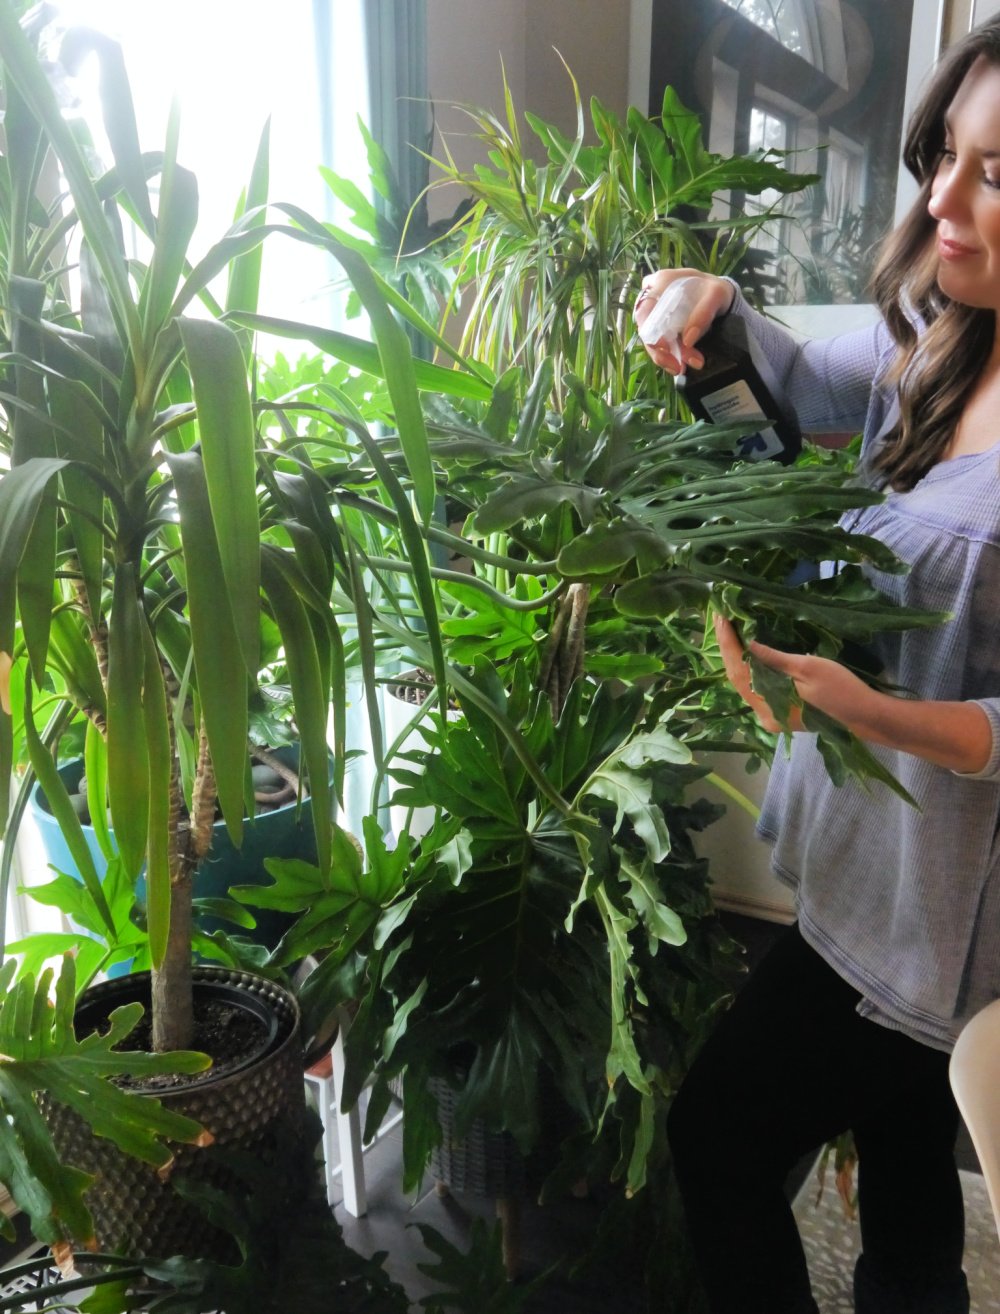 Woman spraying plants with hydrogen peroxide